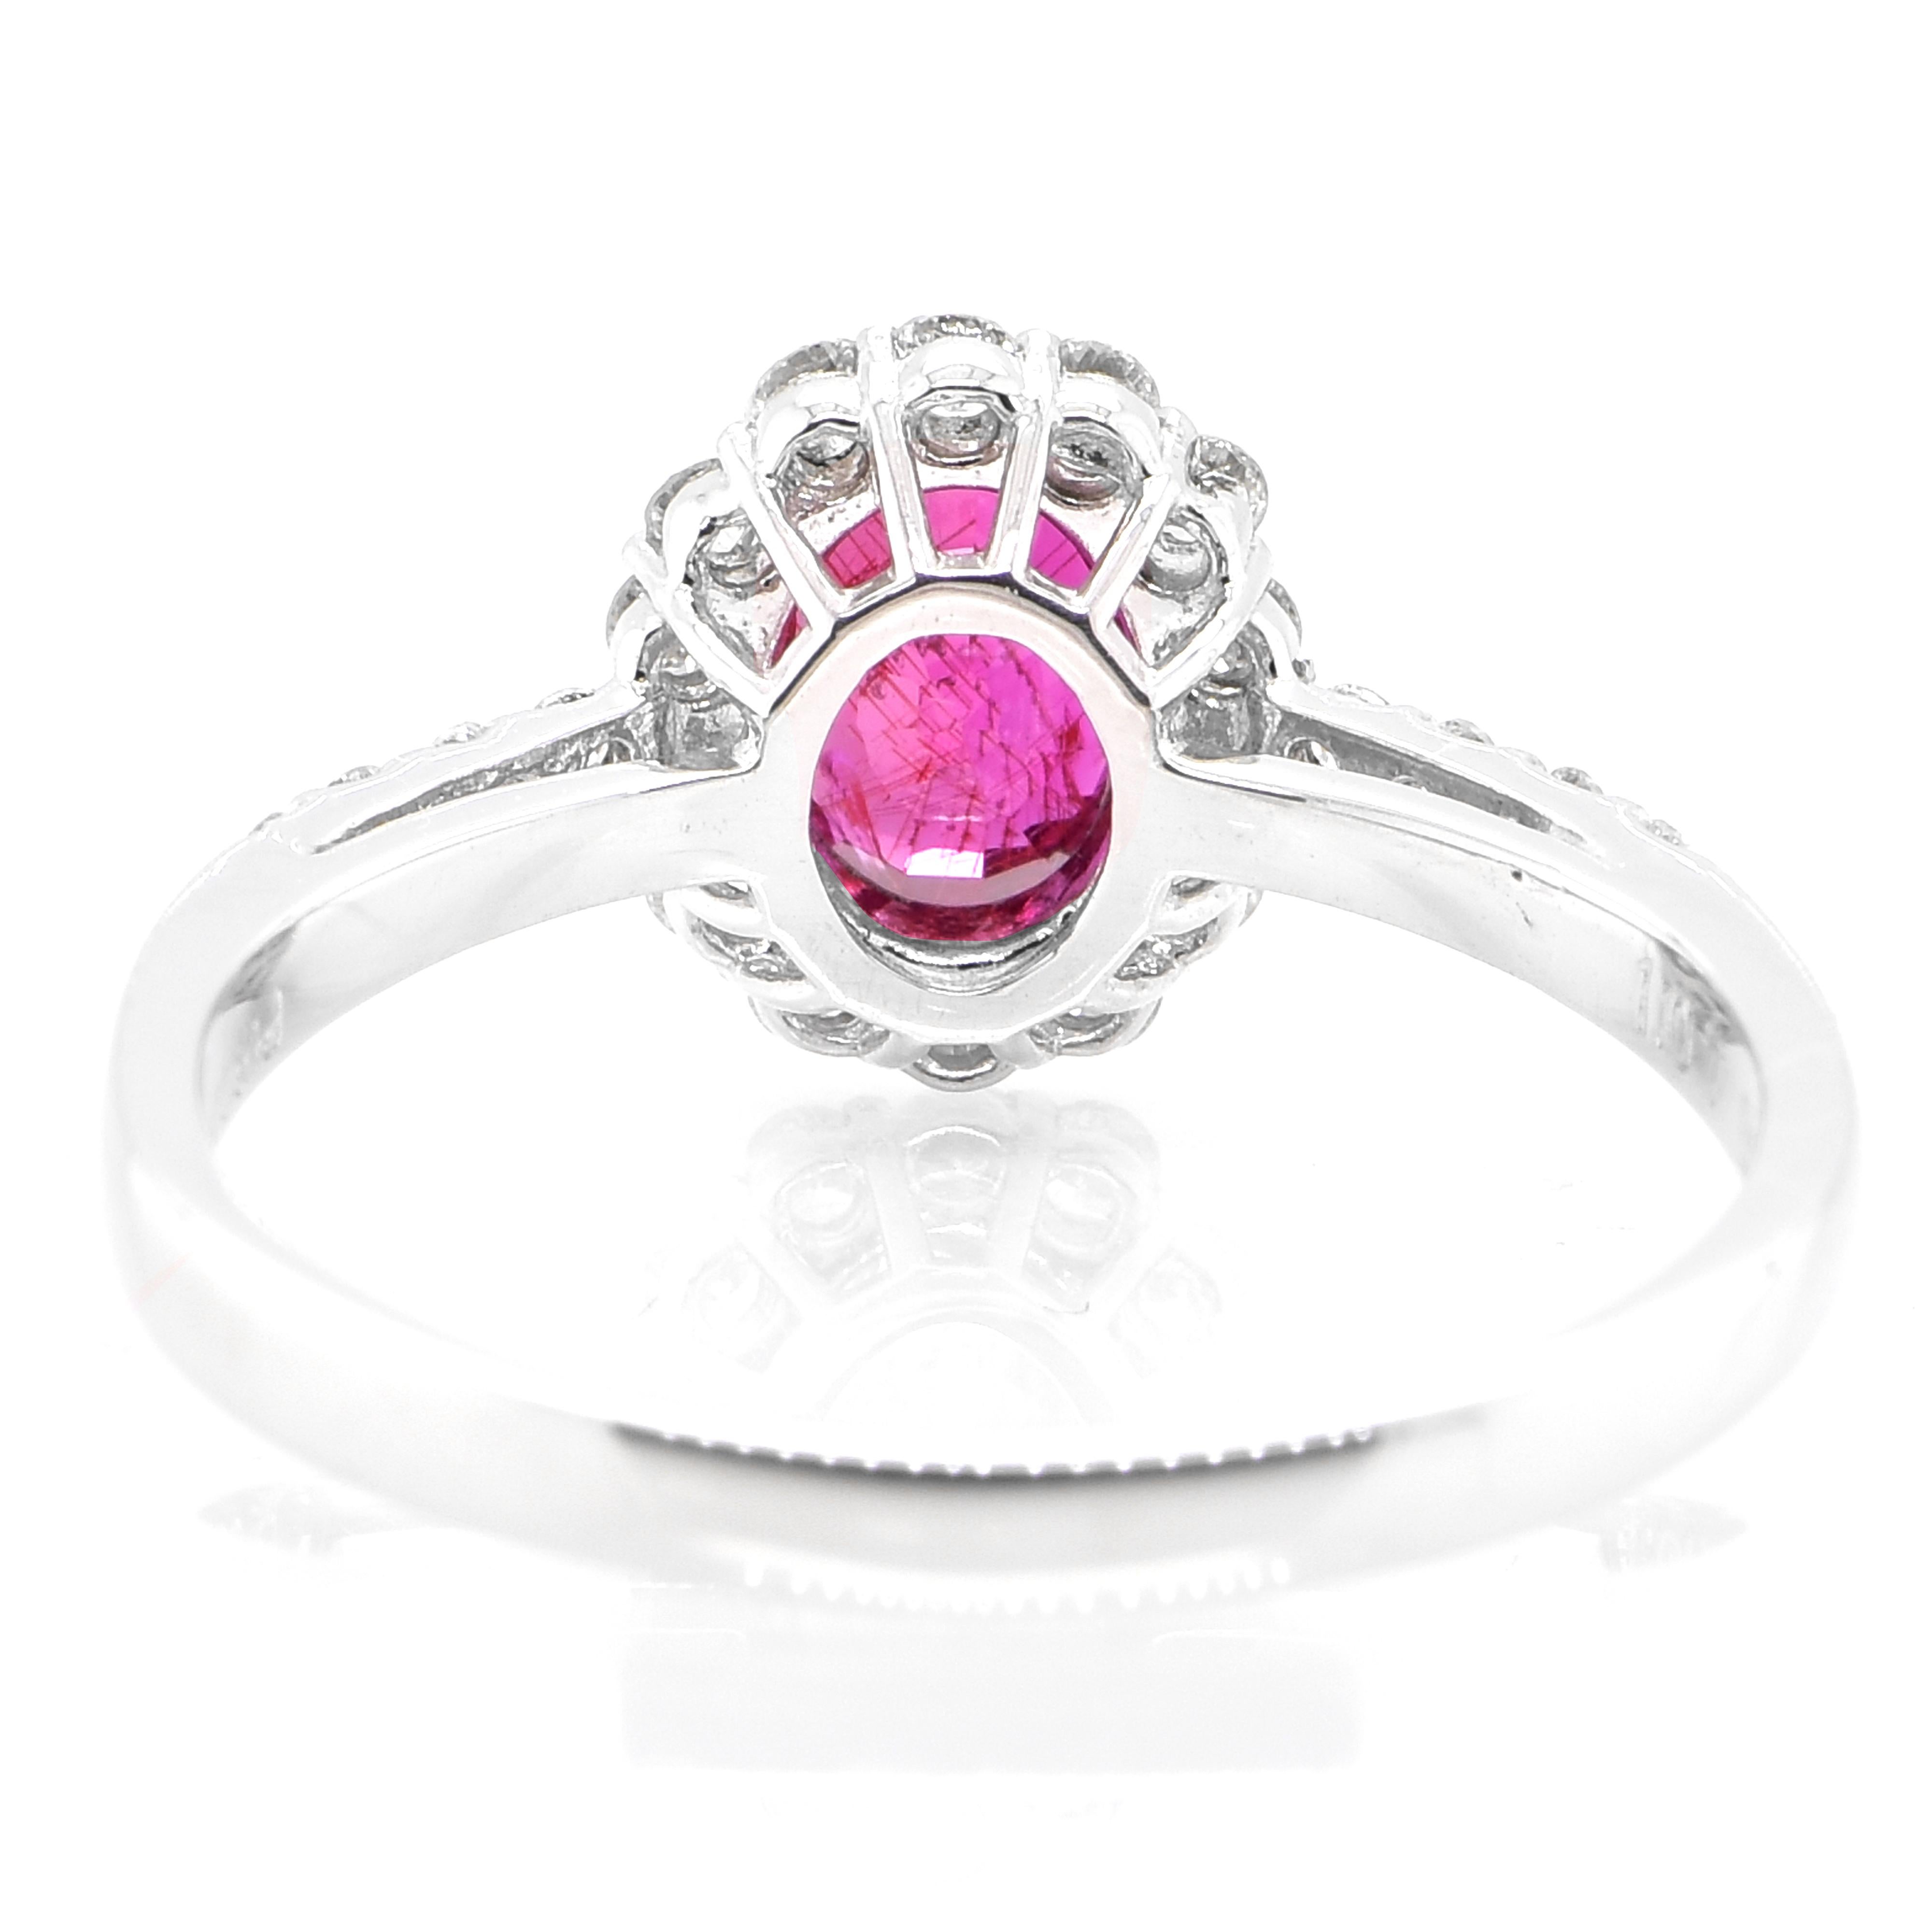 Women's GIA Certified 1.07 Carat Untreated Ruby & Diamond Cocktail Ring Made in Platinum For Sale